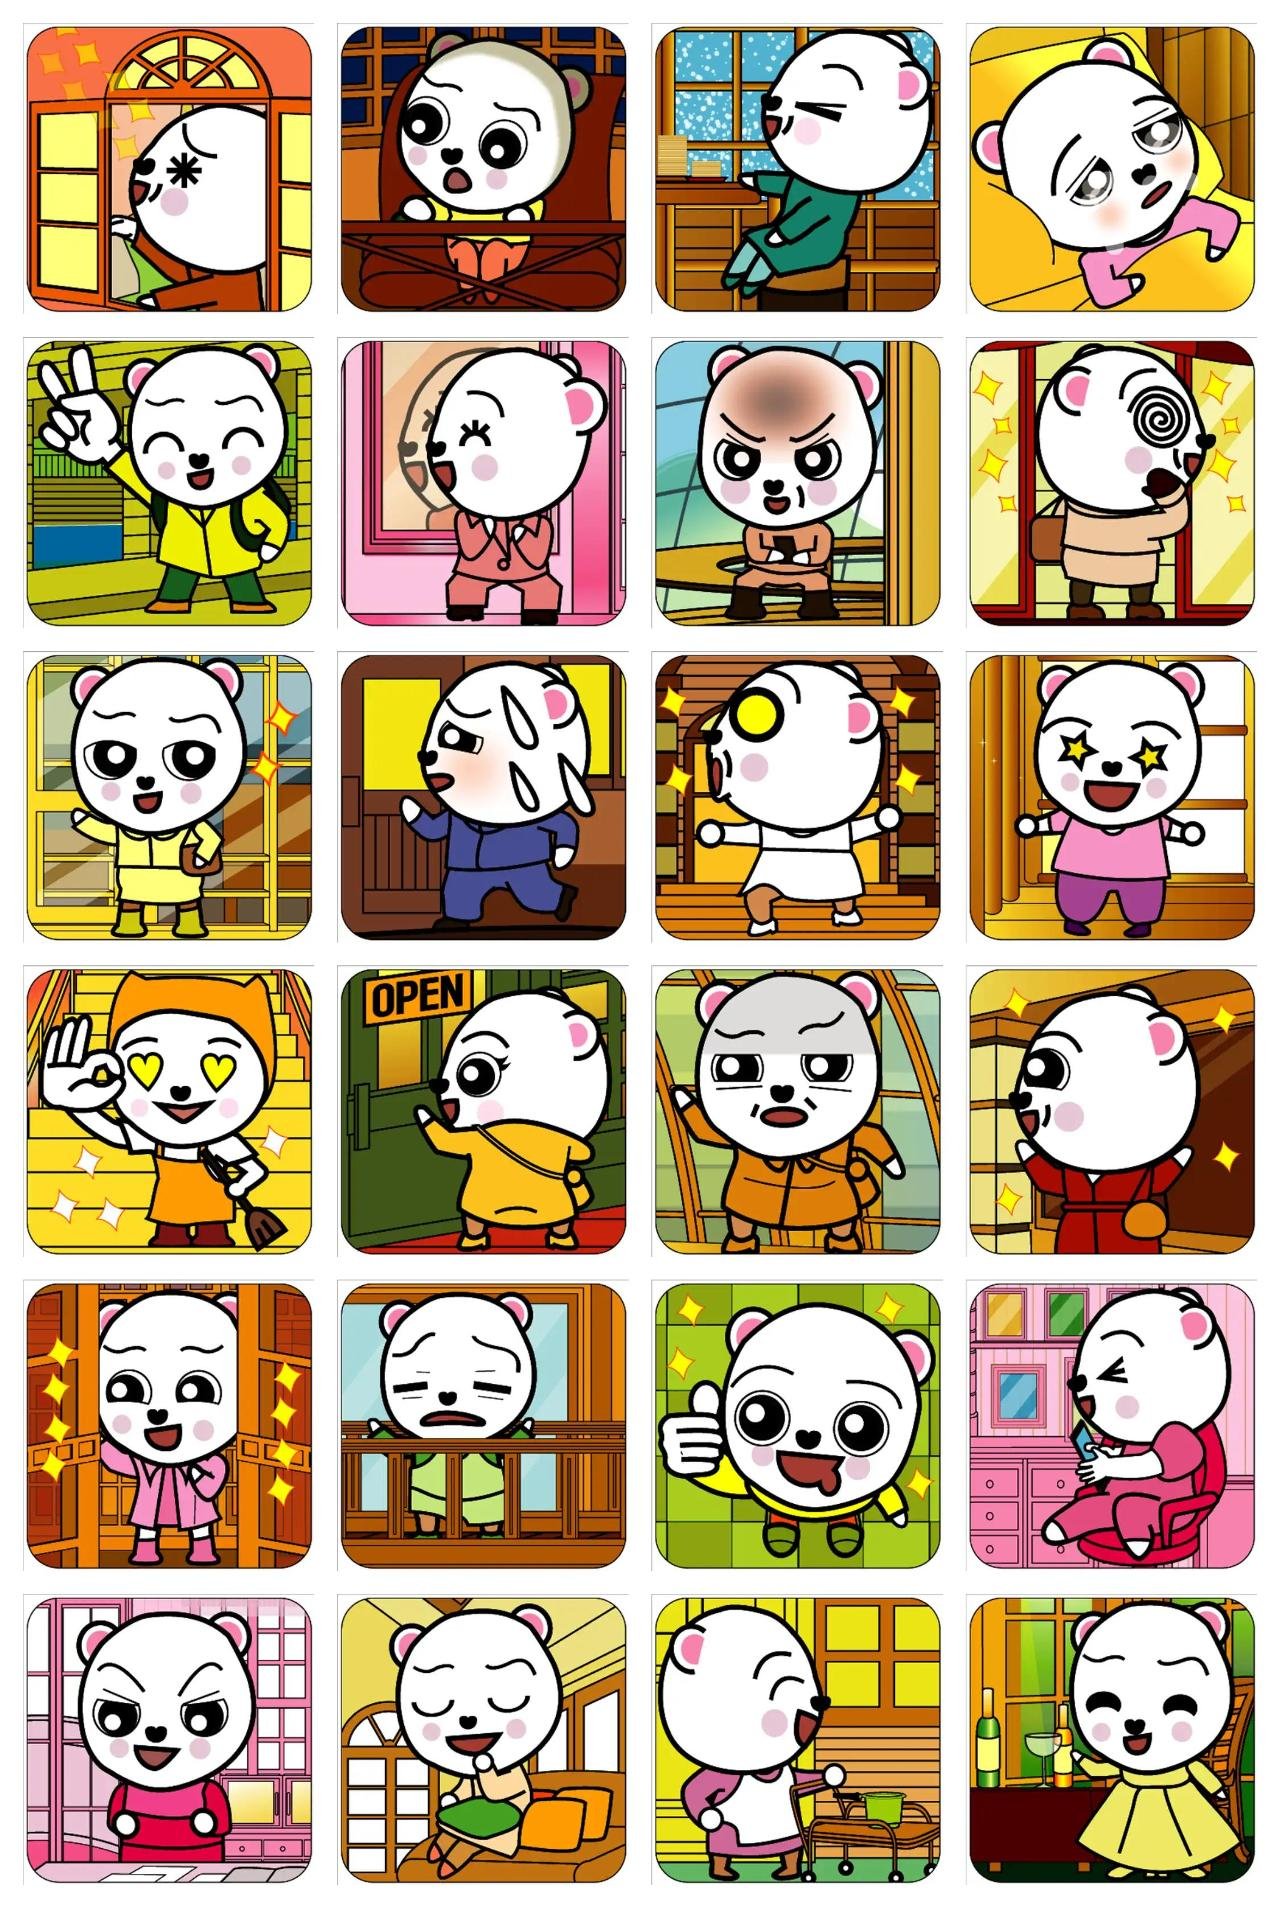 WHITE BEAR'S CITY LIFE Animation/Cartoon,Animals sticker pack for Whatsapp, Telegram, Signal, and others chatting and message apps